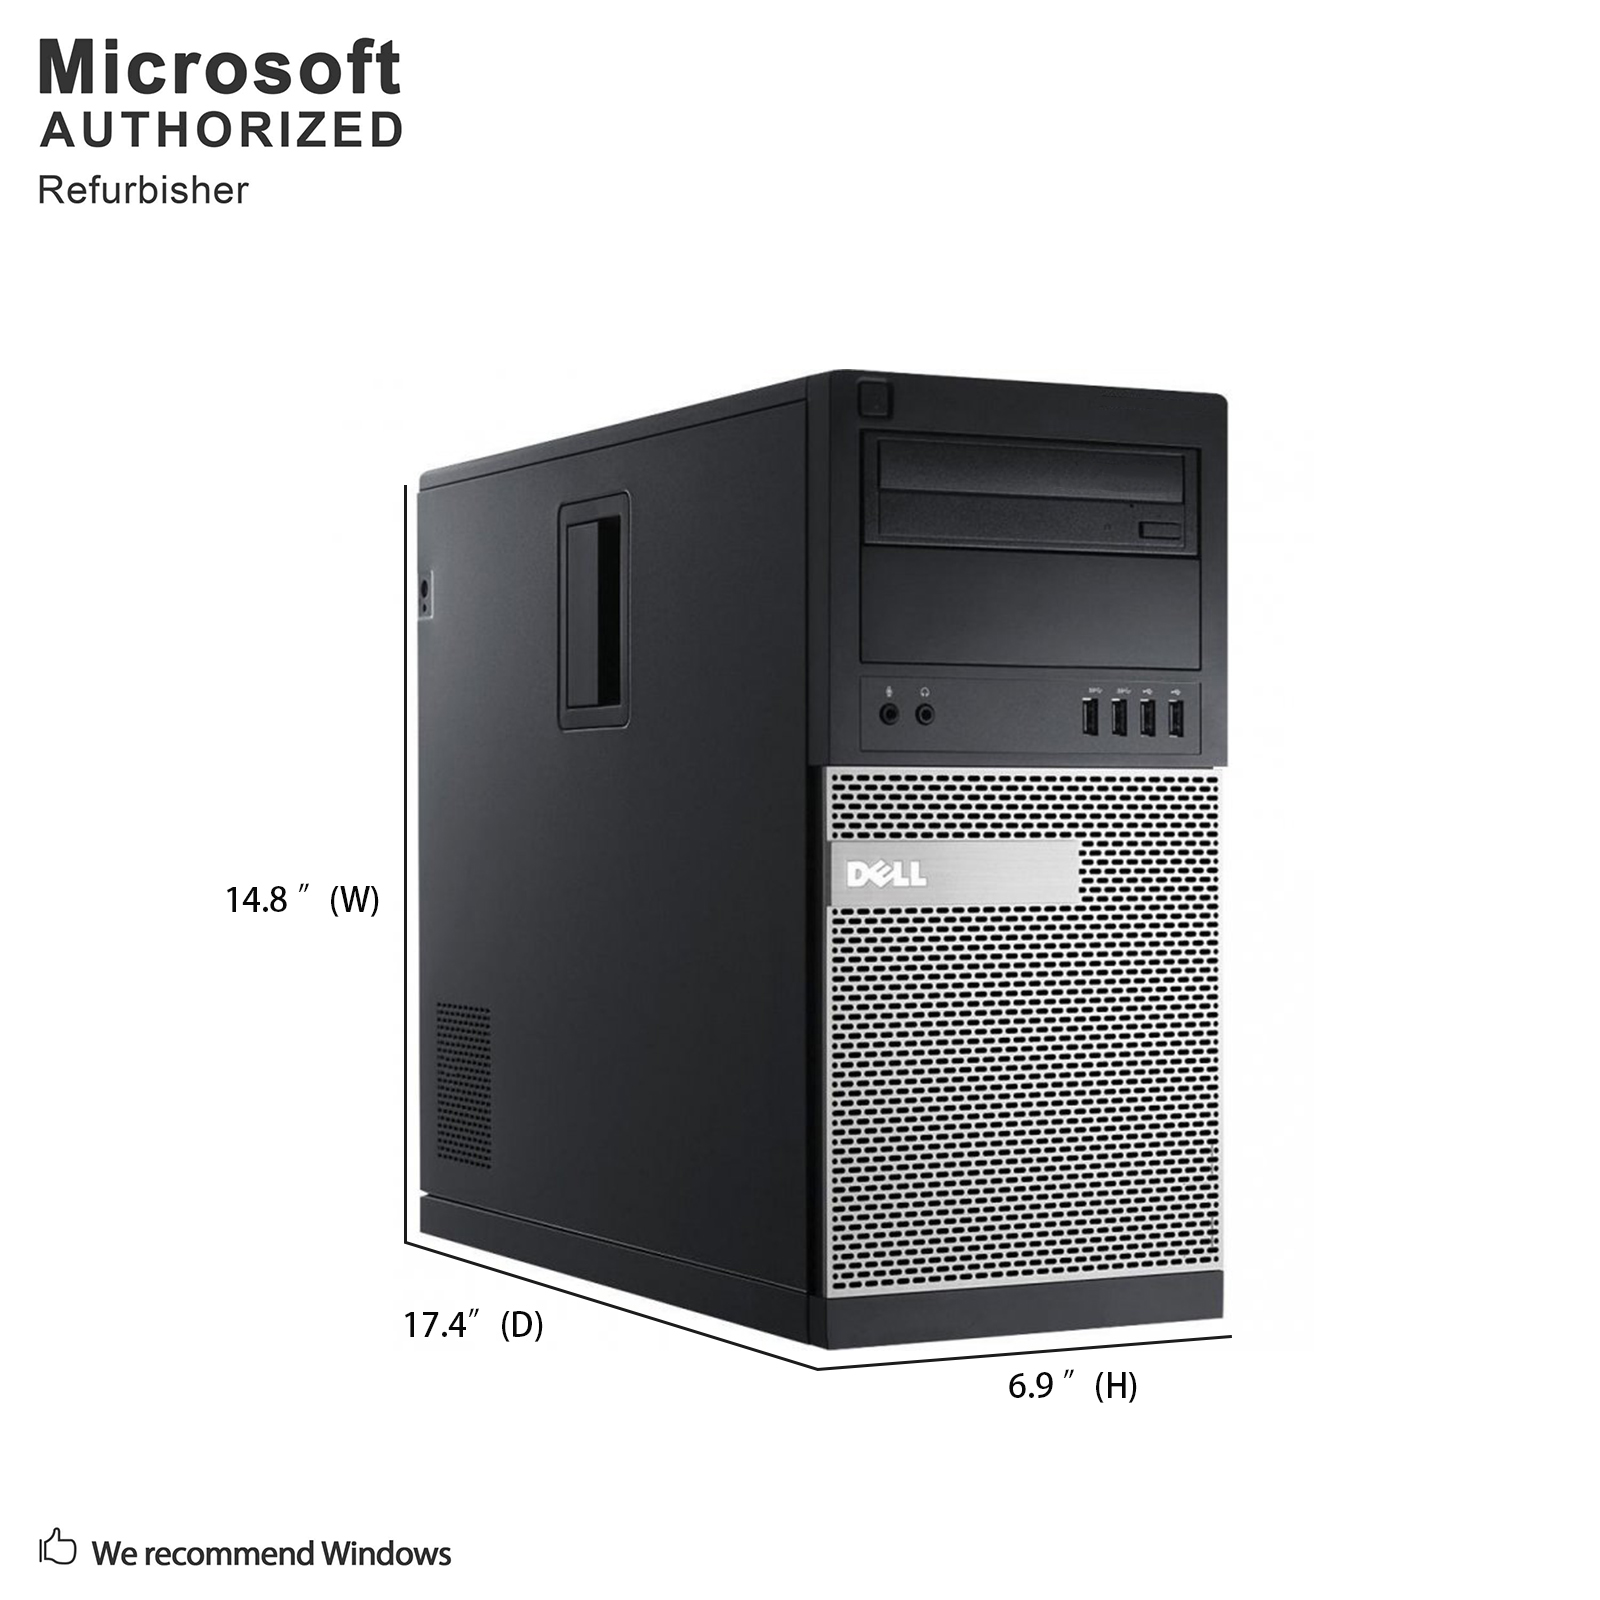 Used Grade A Dell OptiPlex 7010 Tower, Intel Quad Core I7-3770 up to 3.9G, 8G DDR3, 256G SSD, WiFi, BT 4.0, DVD, USB 3.0, VGA, DP, W10P64-Multi Languages Support (EN/ES/FR), 1 year warranty - image 4 of 7